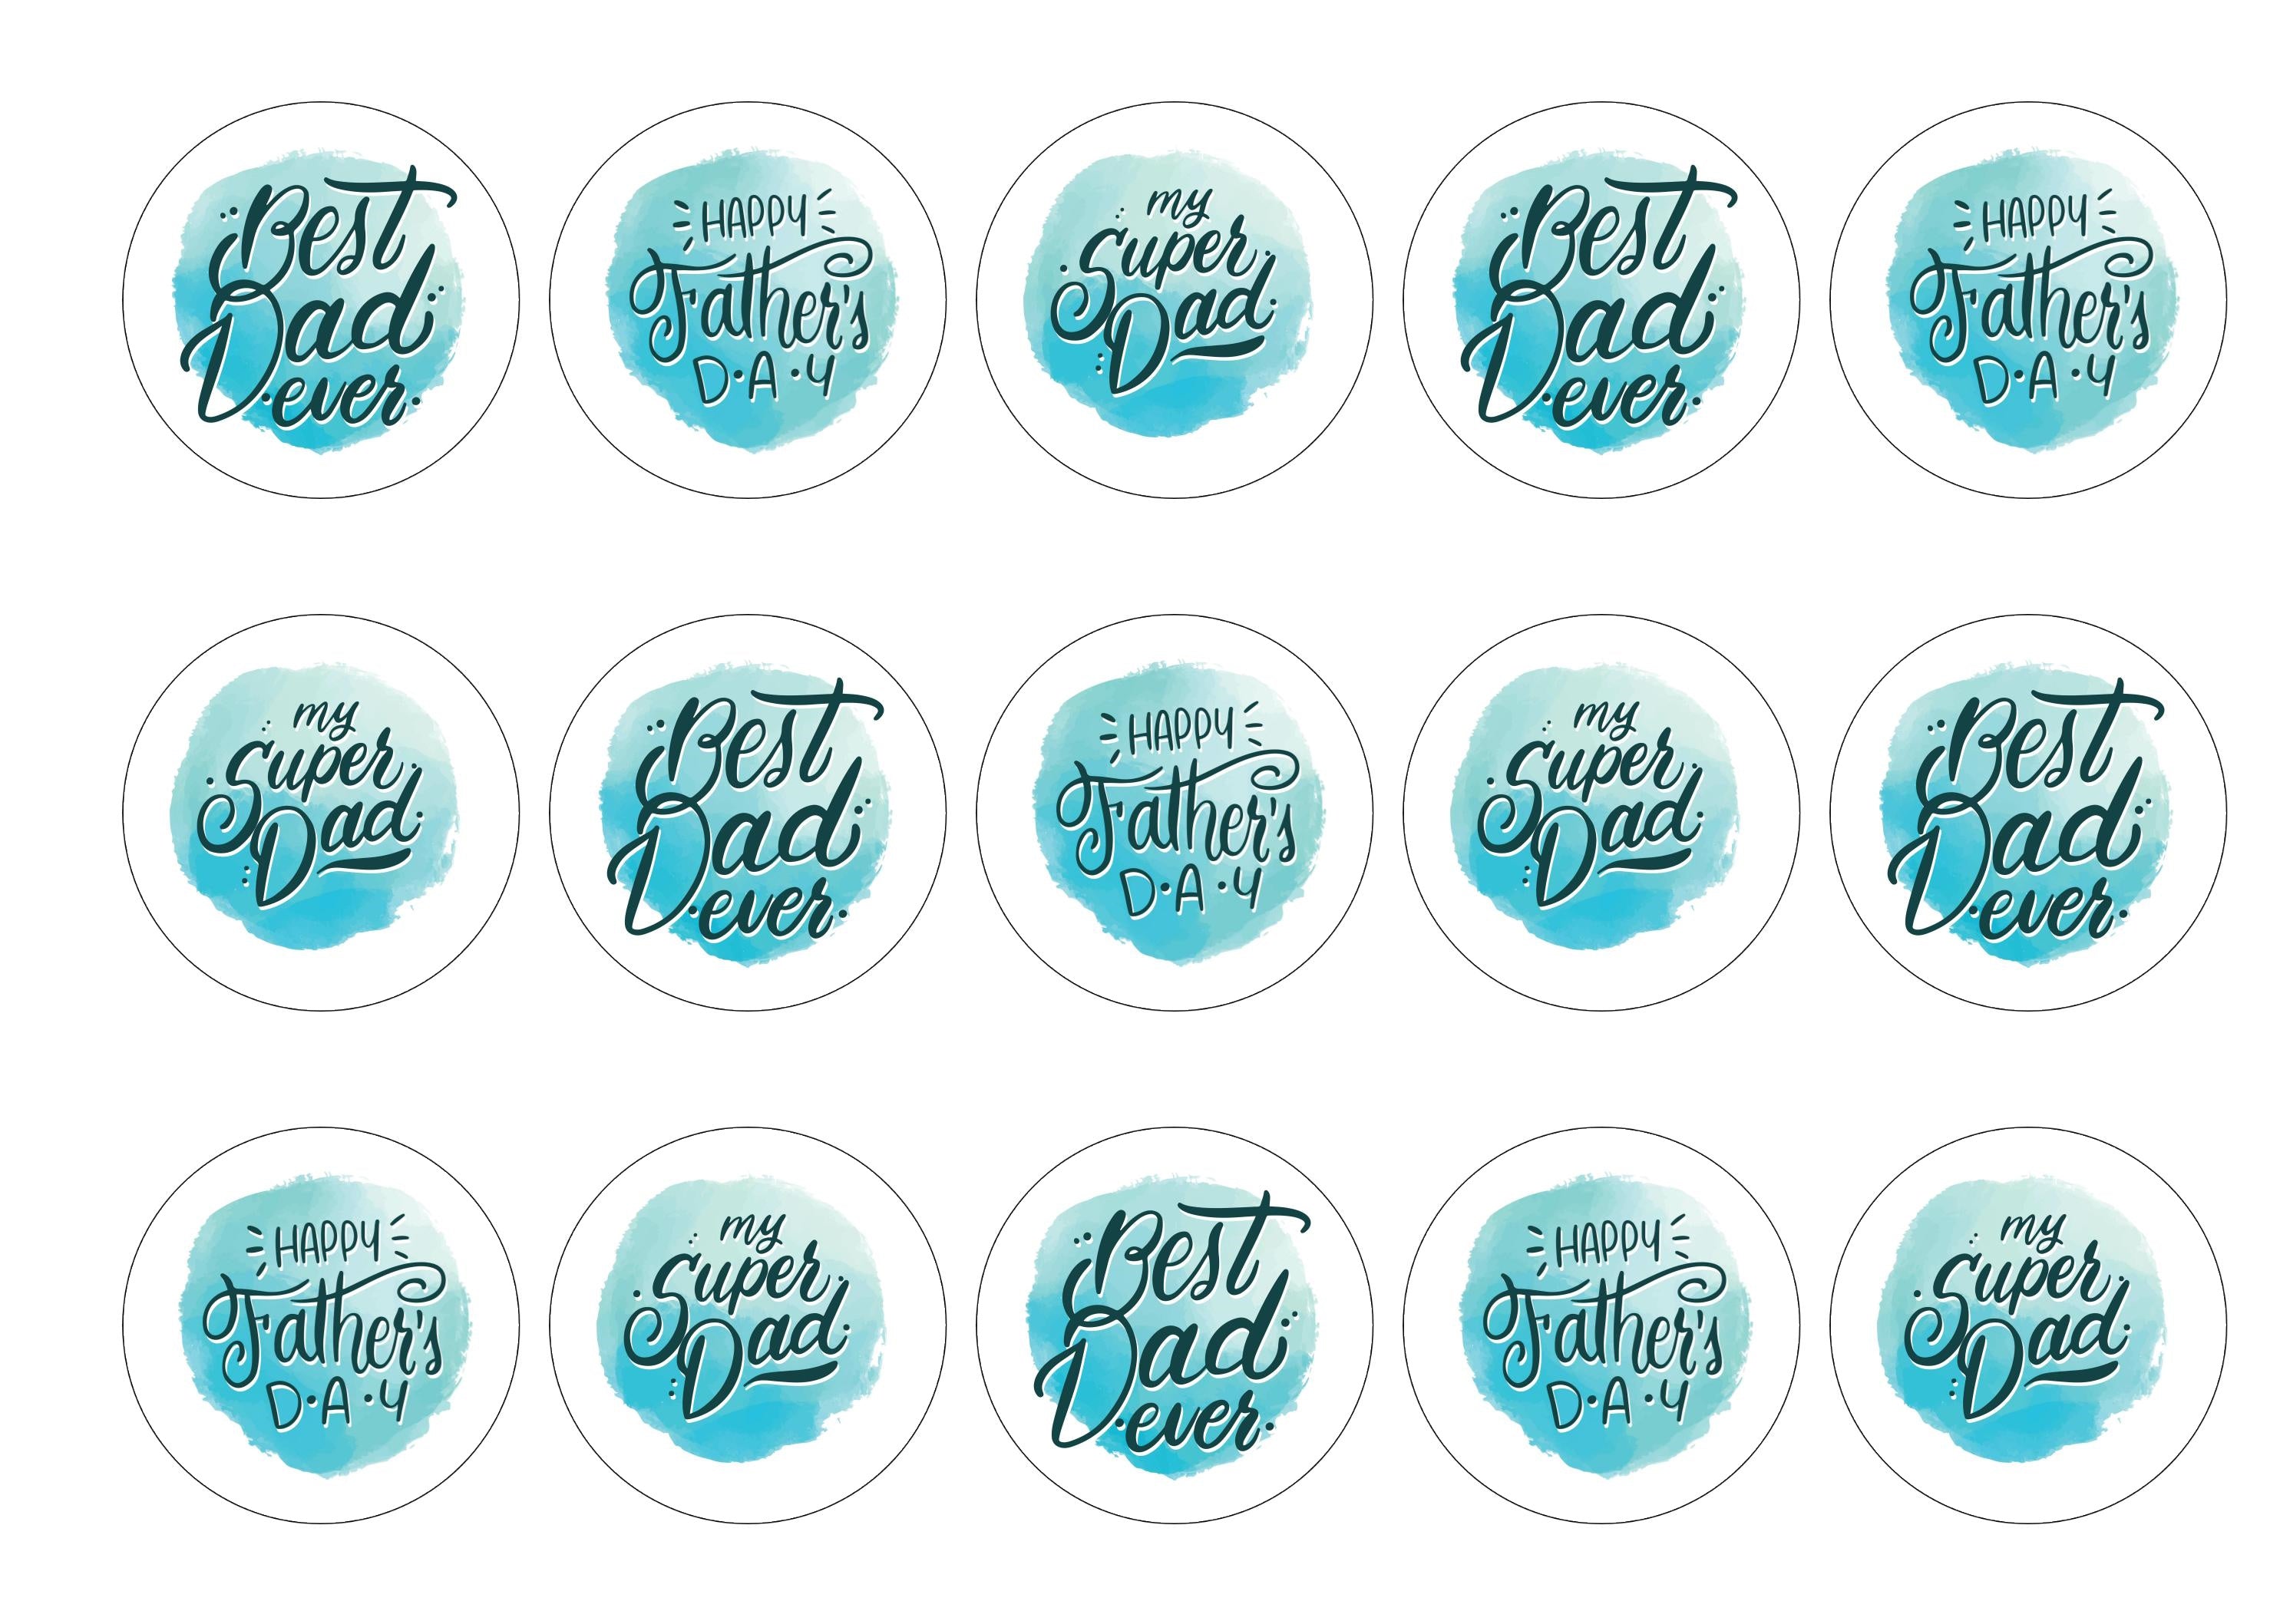 15 Best Dad Ever cupcake toppers for Father's Day